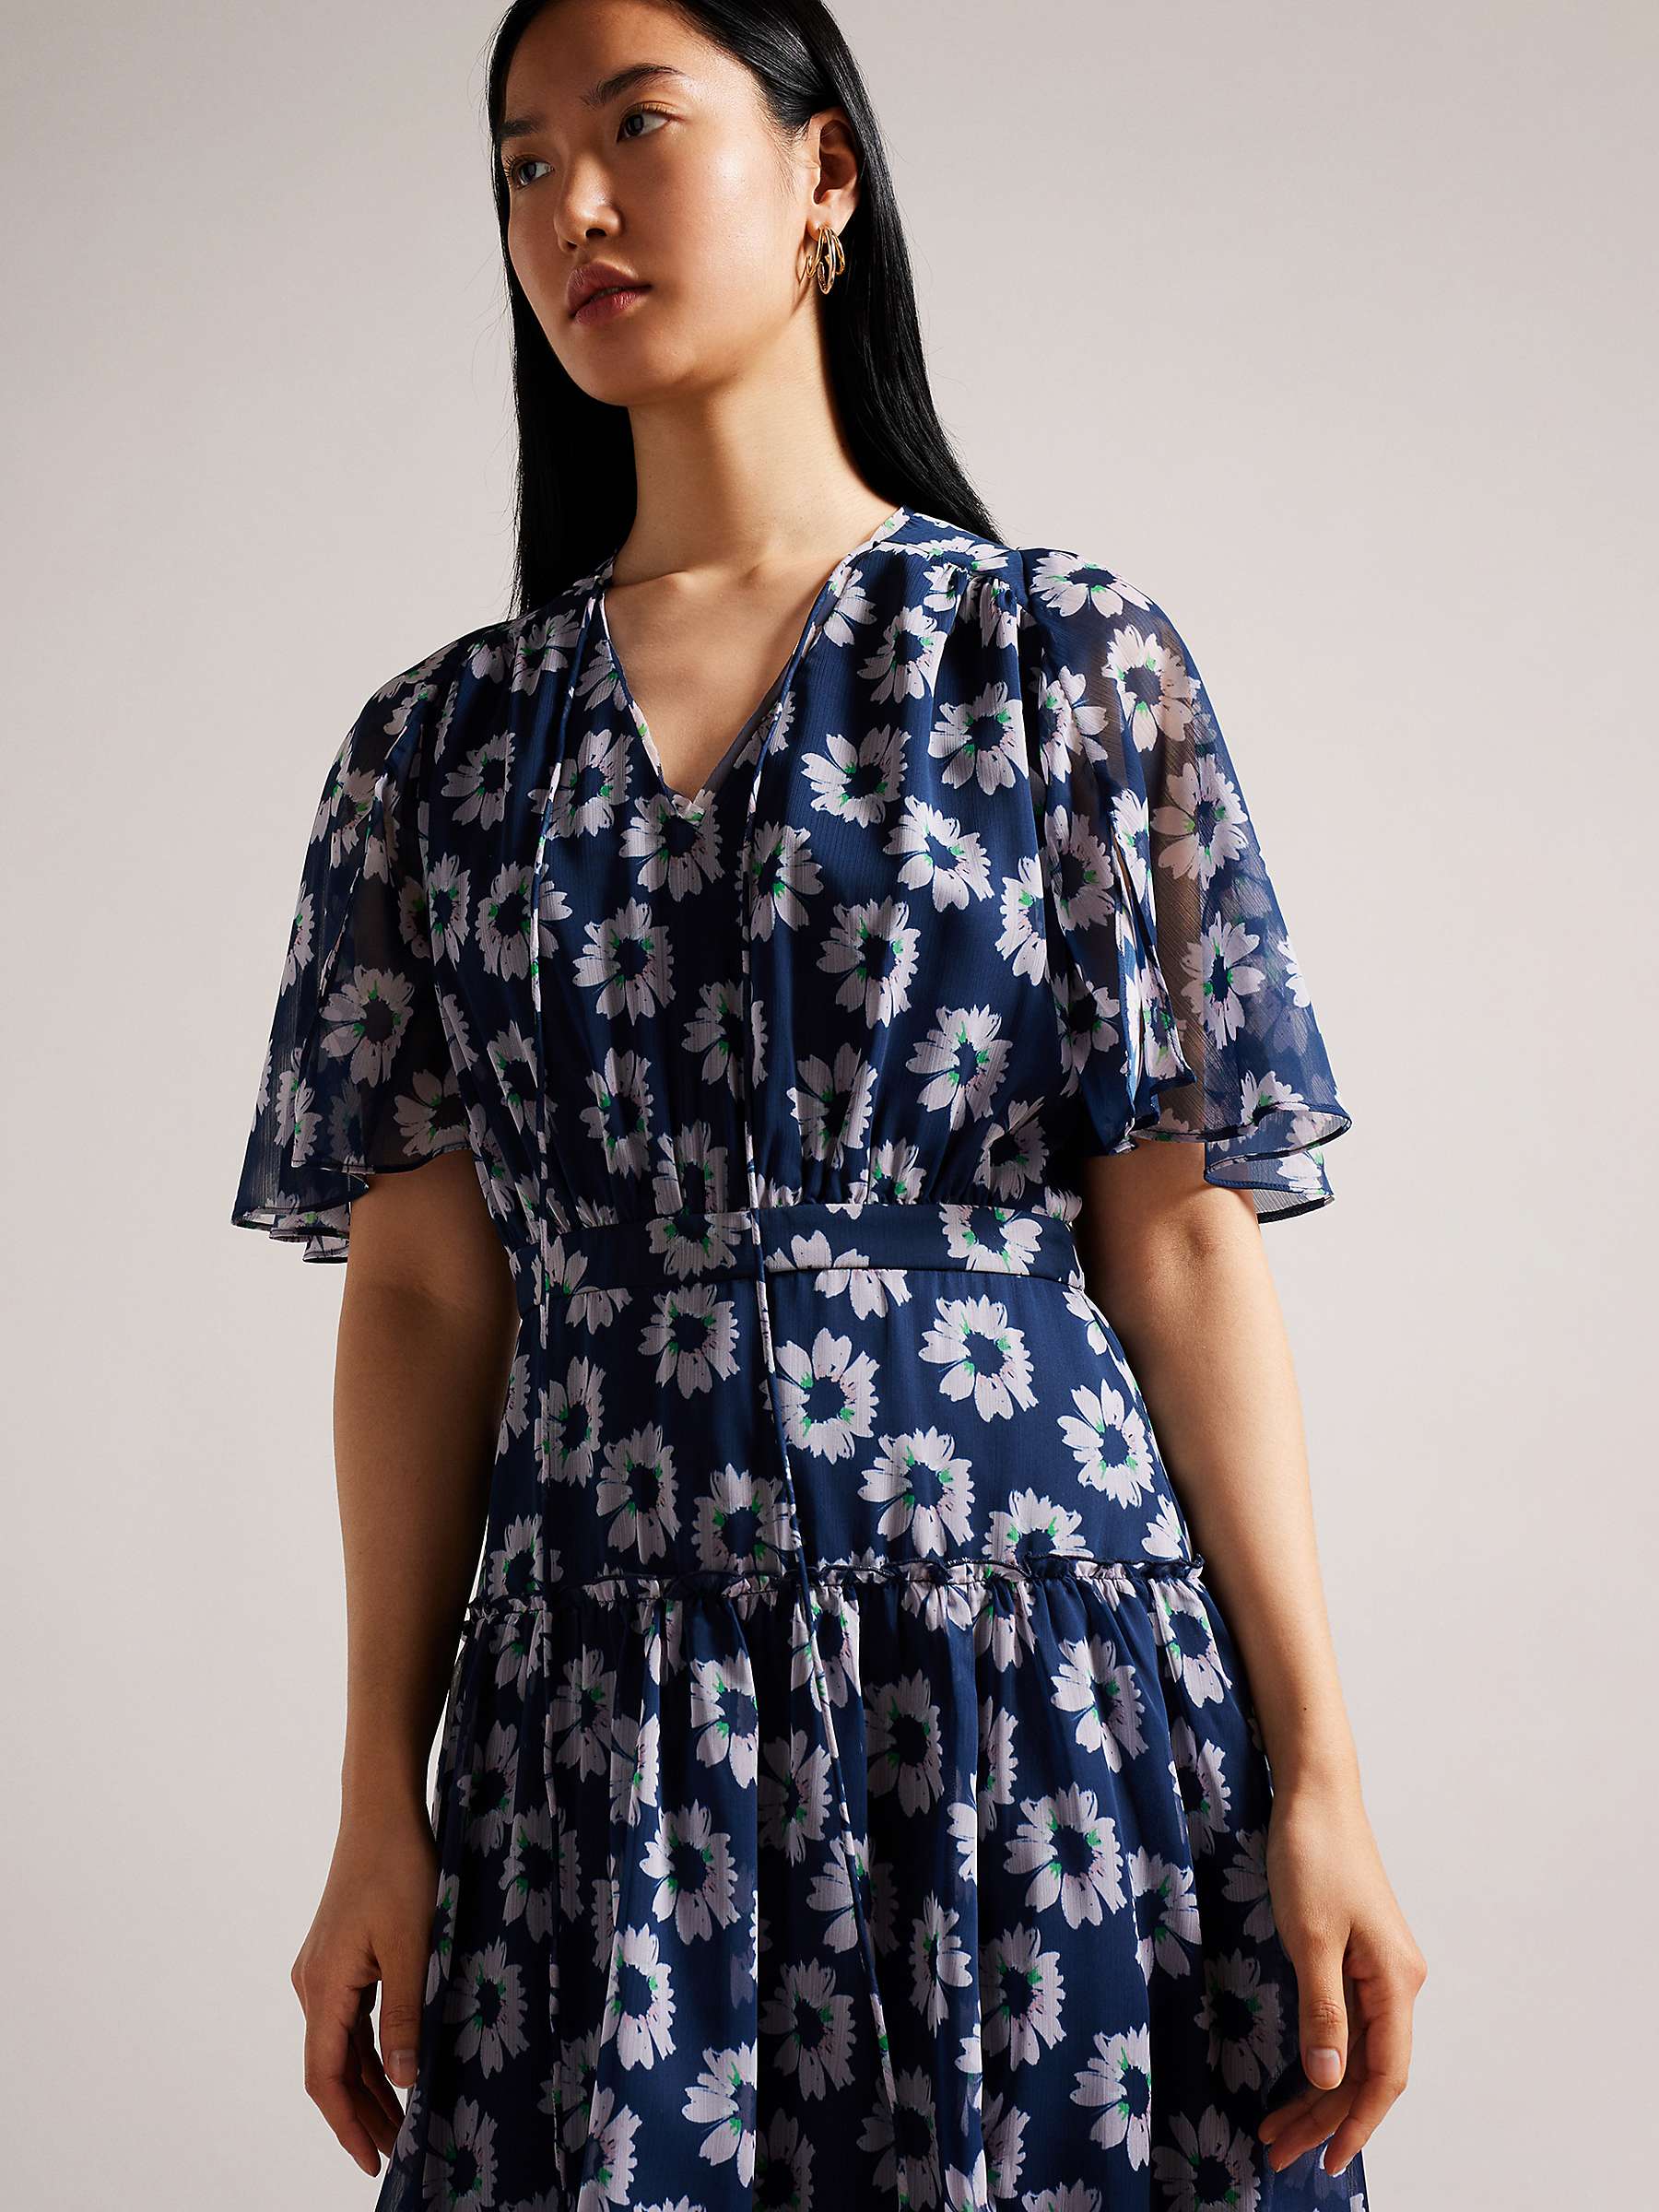 Buy Ted Baker Marllee Fit and Flare Floral Tiered Midi Dress, Dark Navy/White Online at johnlewis.com